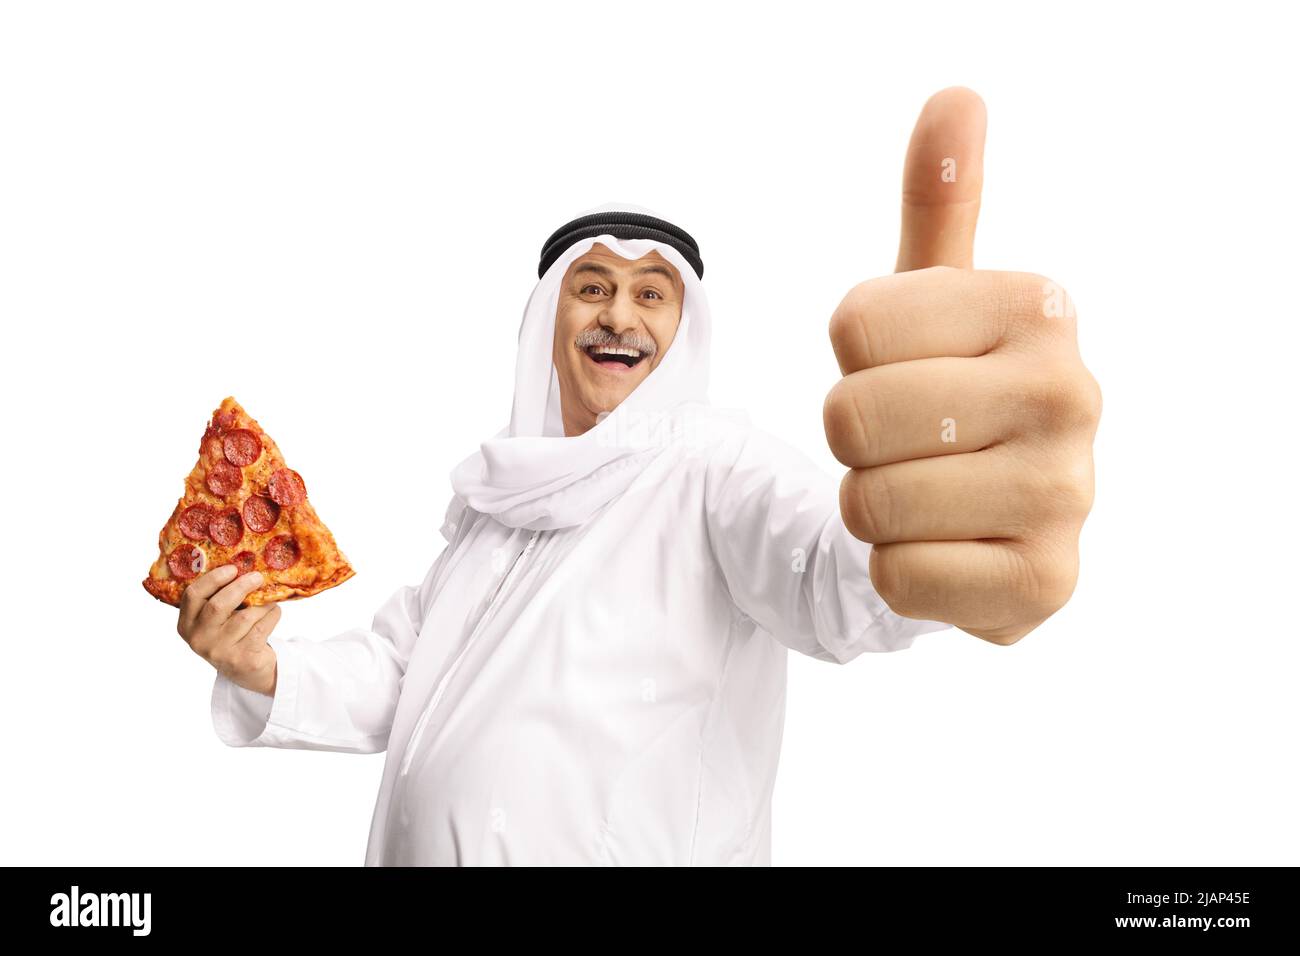 Mature arab man holding pepperoni pizza slice and showing thumbs up isolated on white background Stock Photo